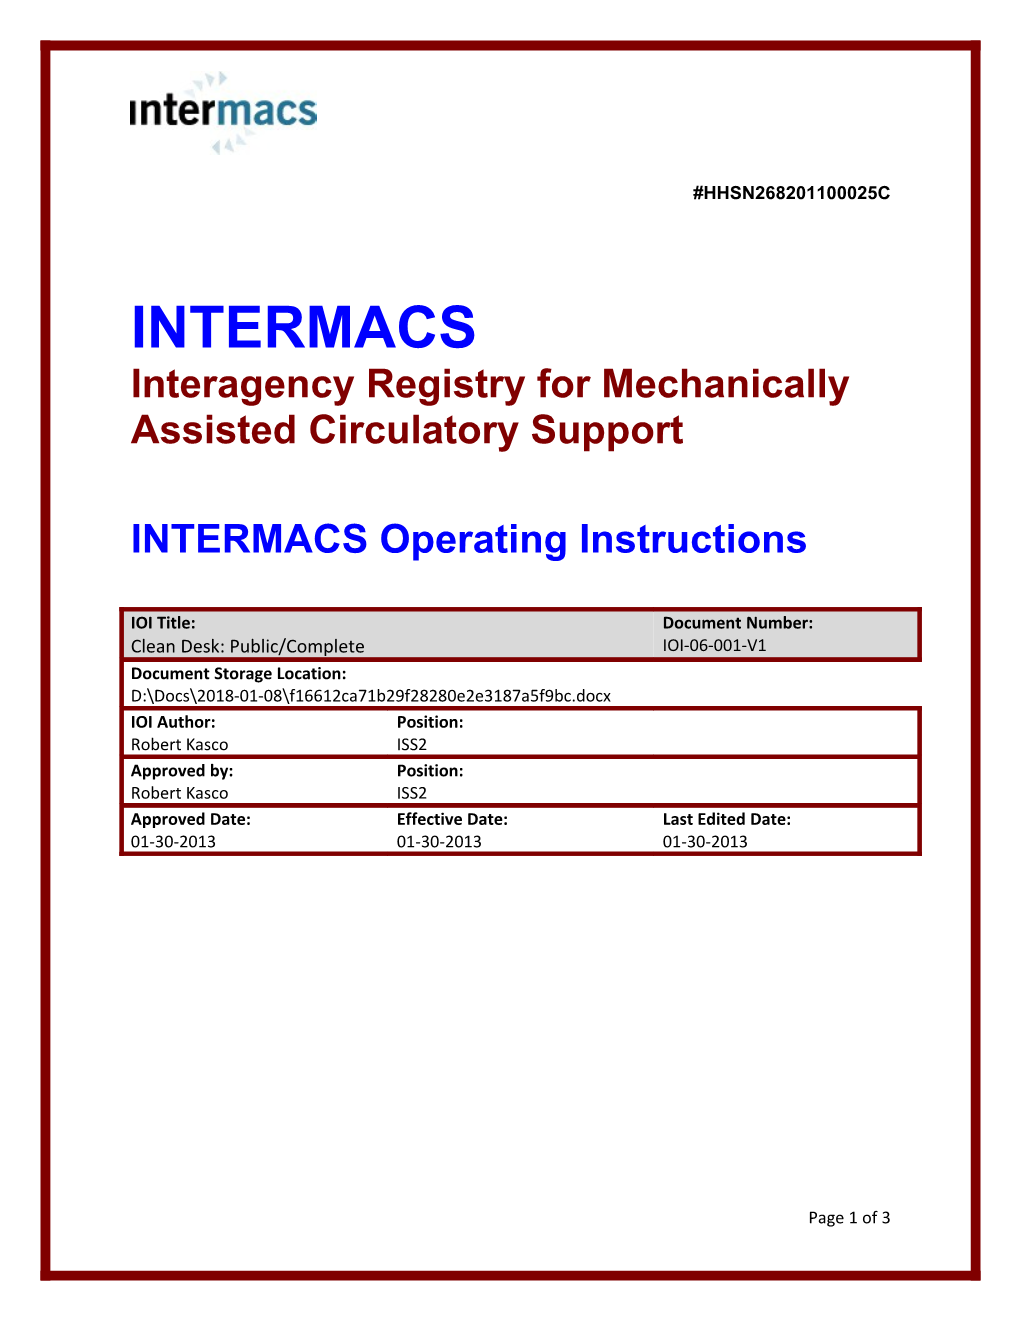 INTERMACS Interagency Registry for Mechanically Assisted Circulatory Support INTERMACS